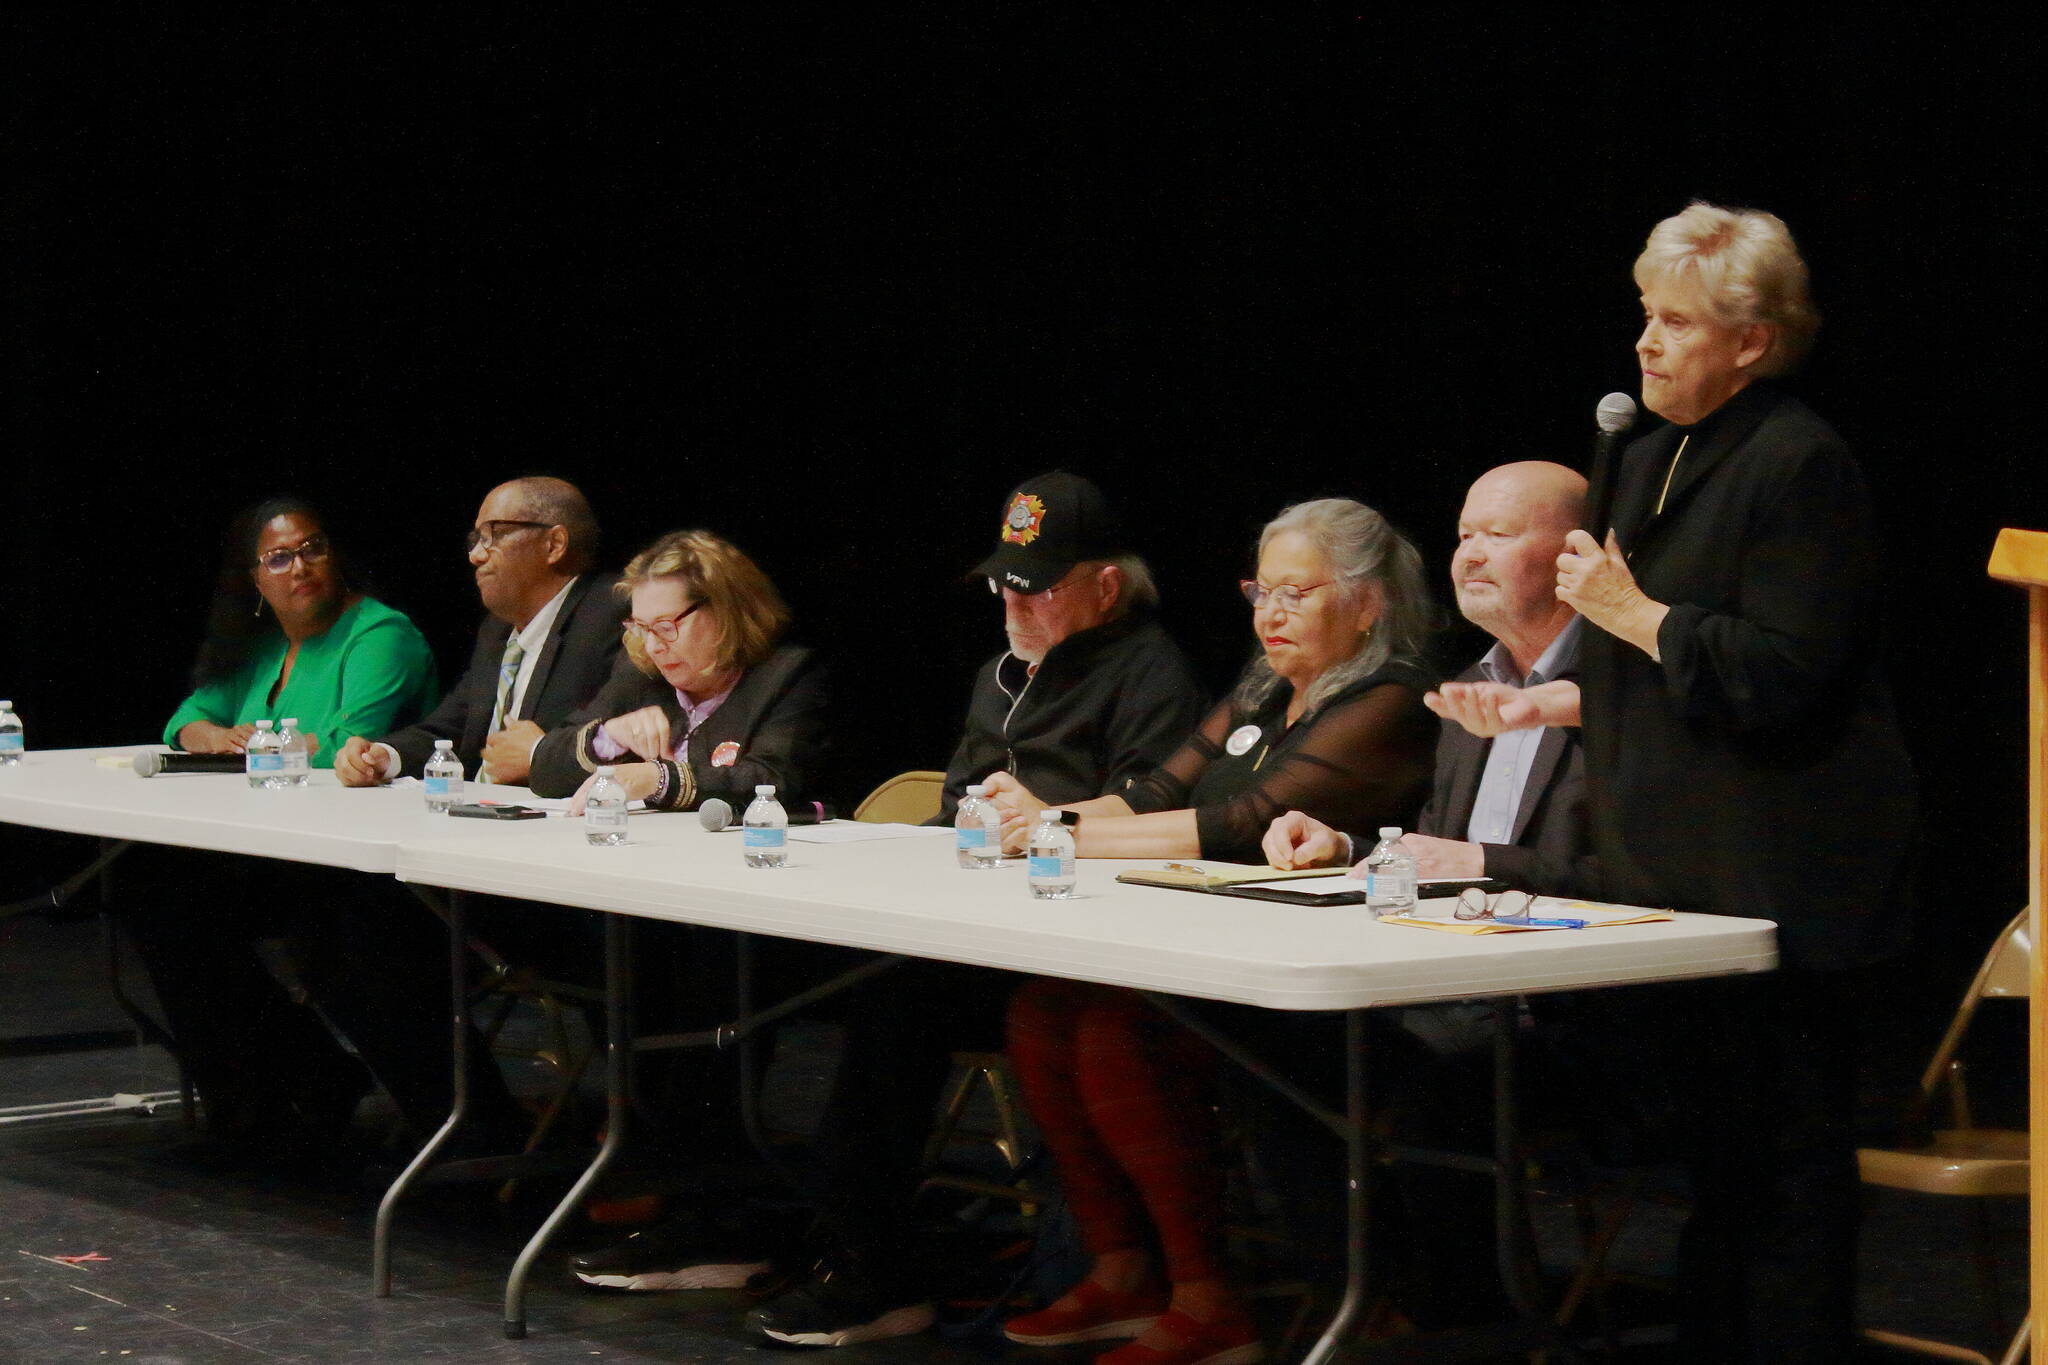 City council candidates from left to right at the Oct. 11 debate: Lydia Assefa-Dawson, Mark Greene, Susan Honda, Roger Flygare, Katherine Festa, Jack Walsh and Linda Kochmar. Photo by Keelin Everly-Lang / The Mirror